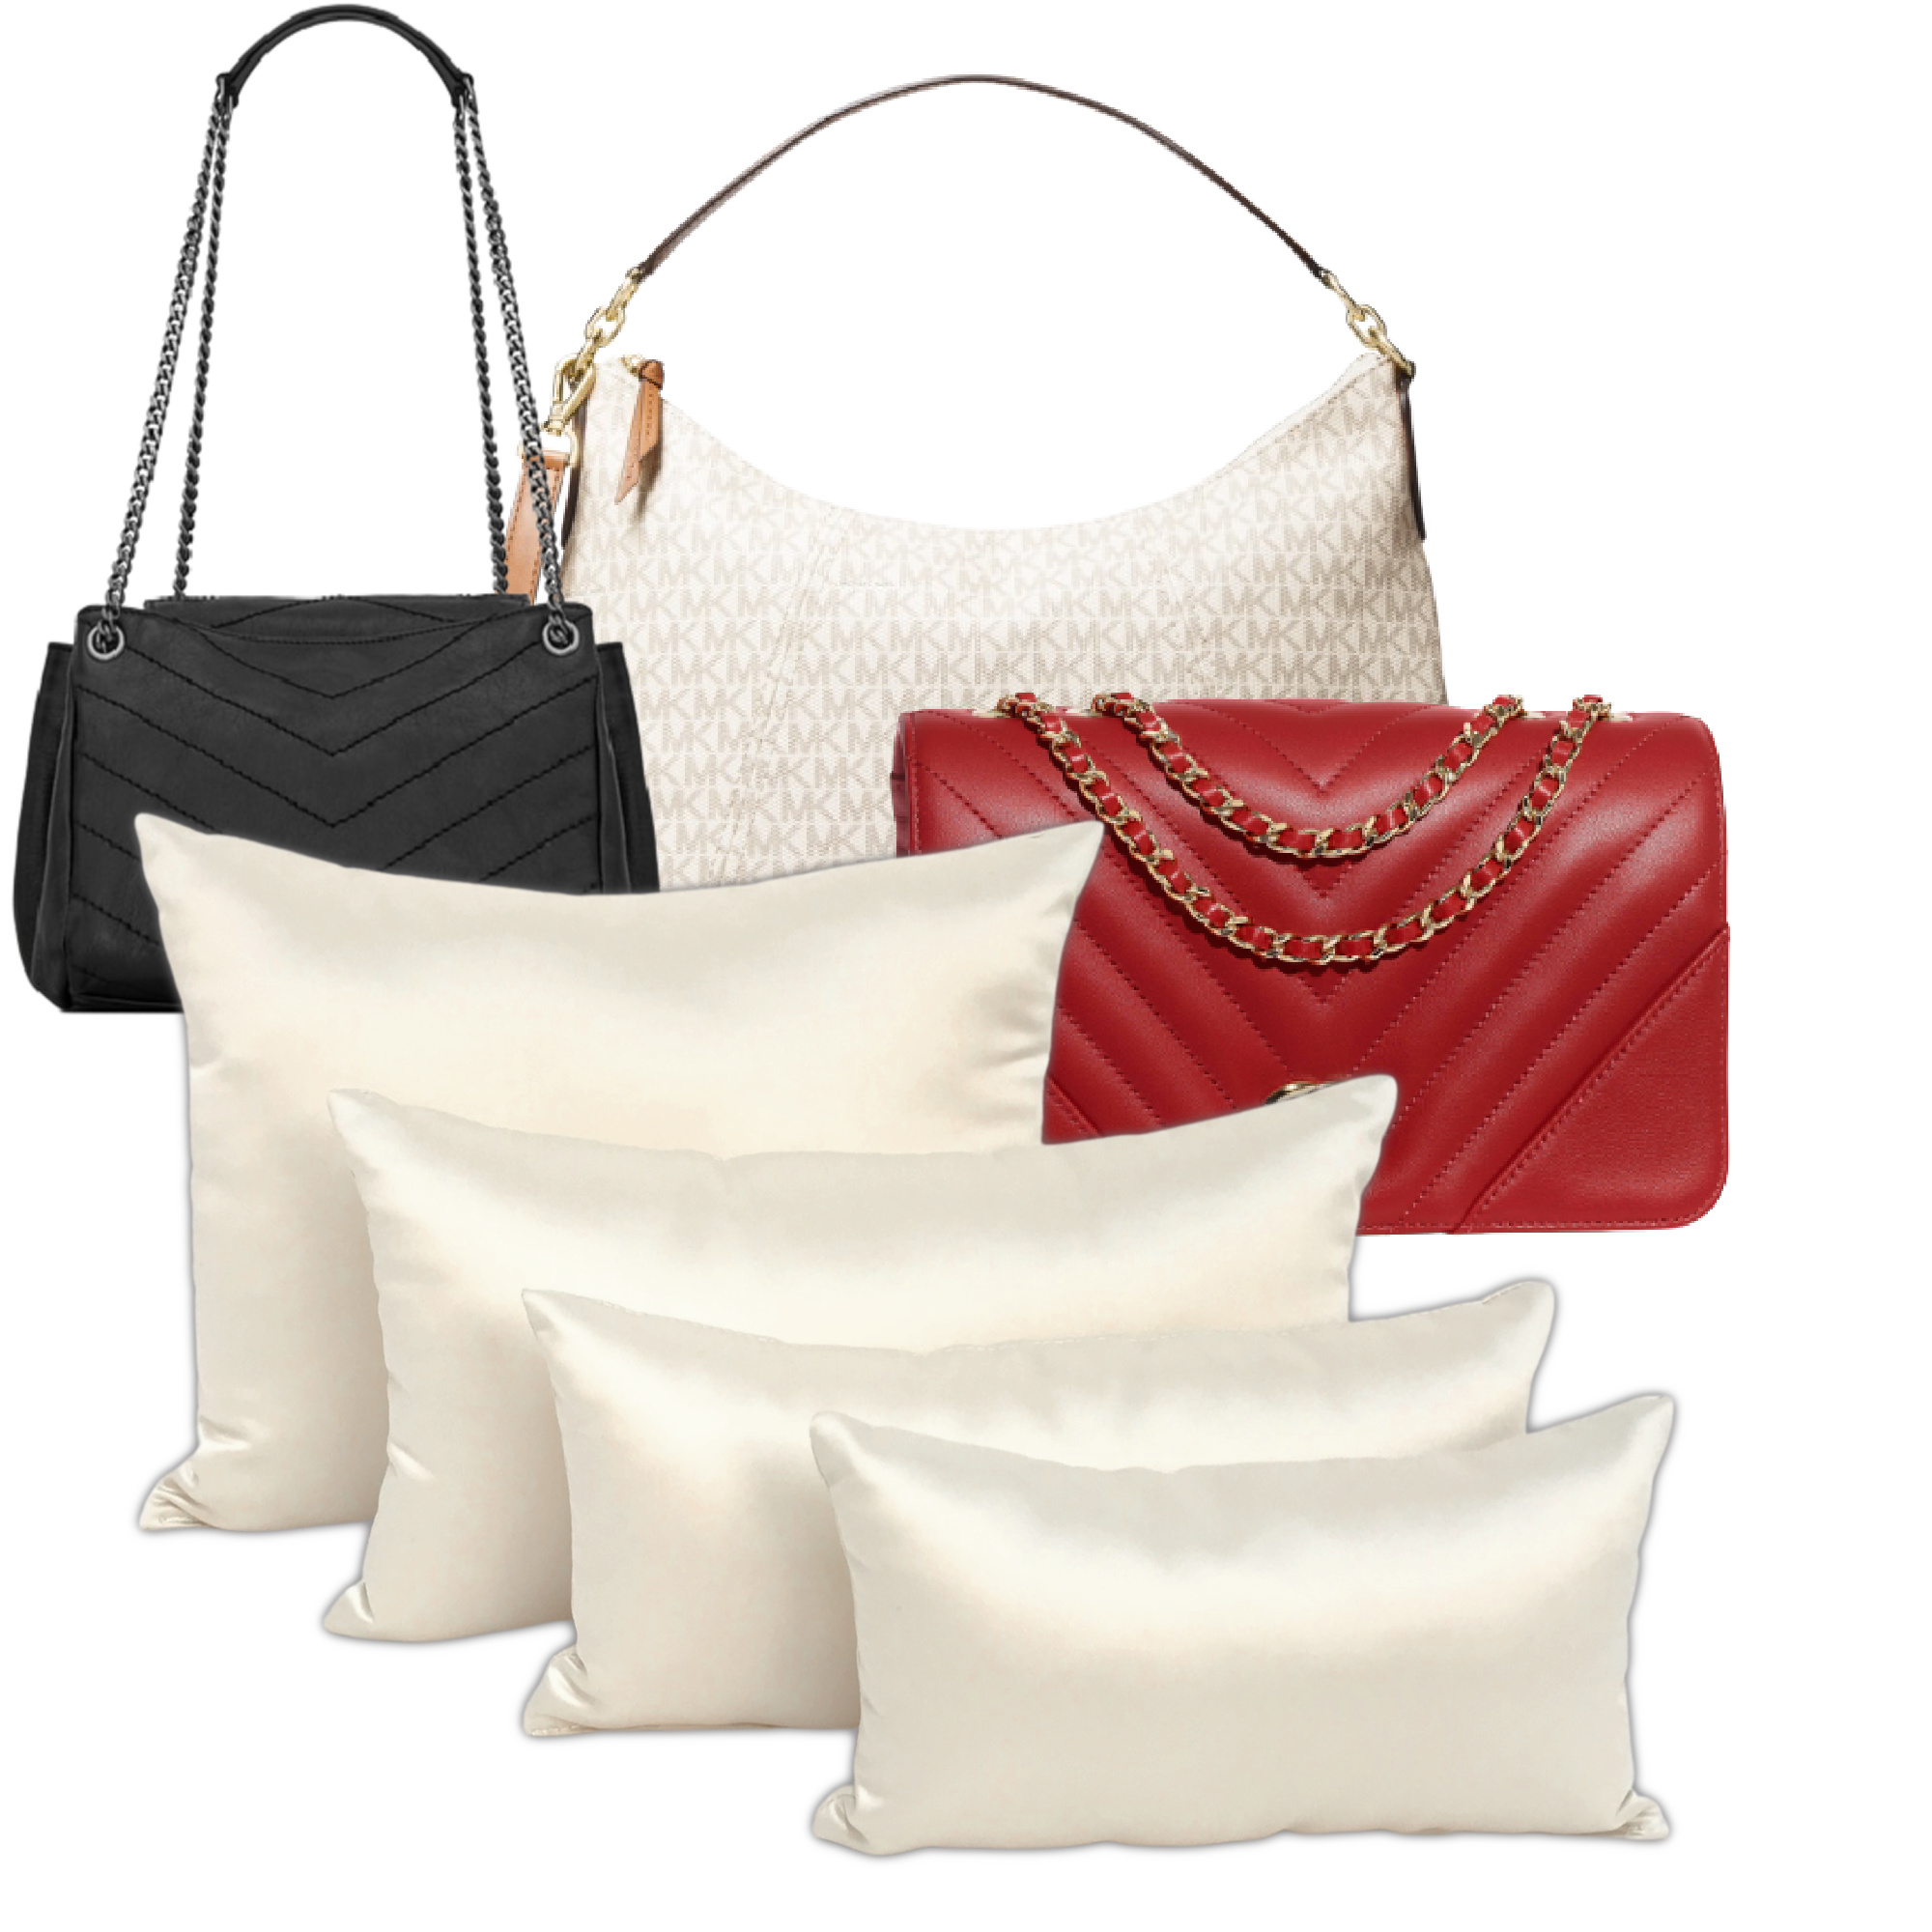 Shop organisers liners pillows for Luxury bags